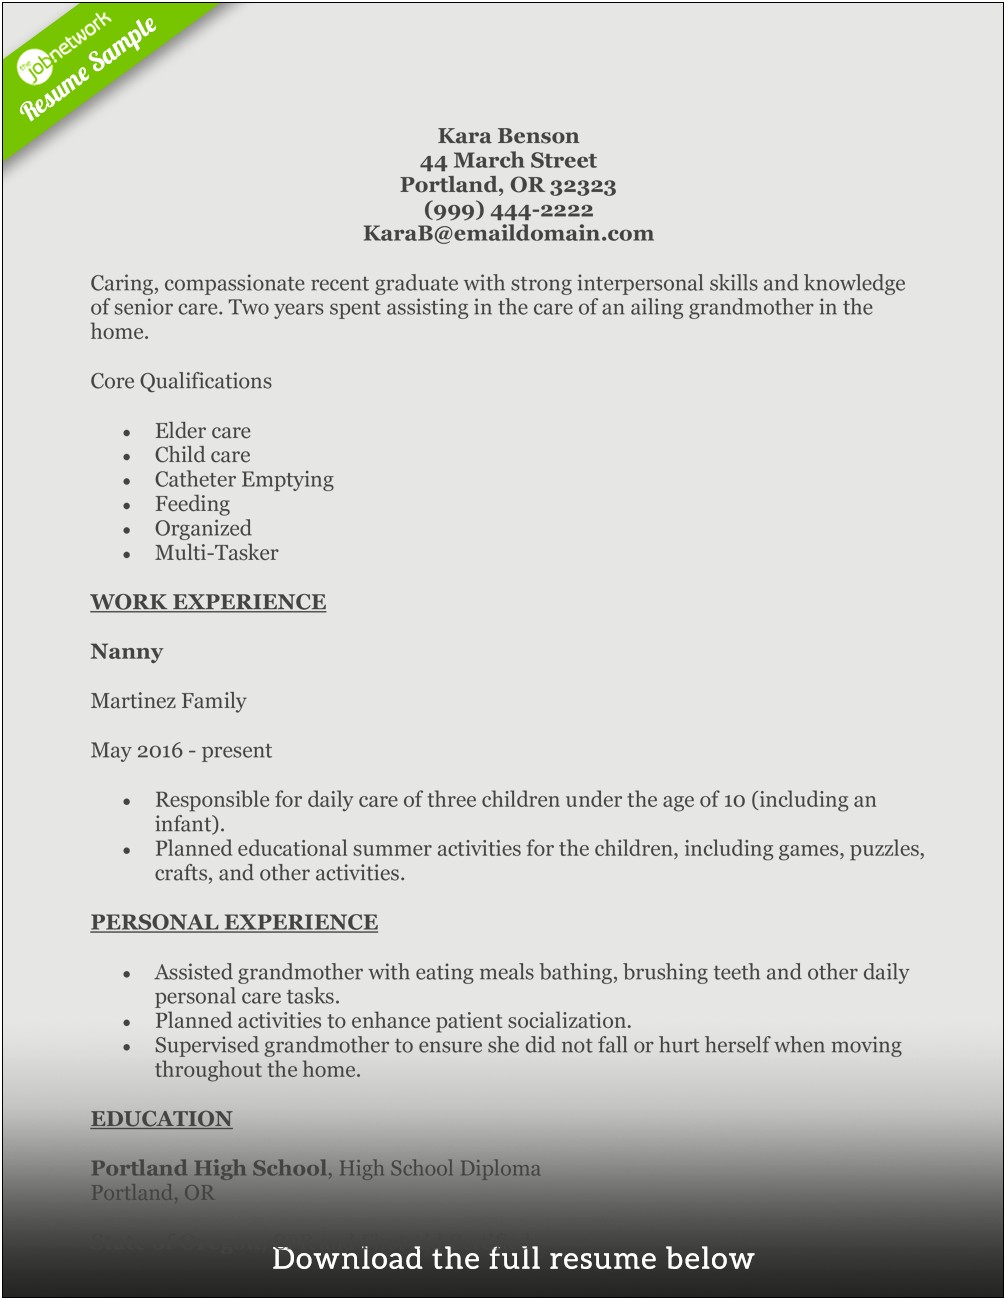 Skills And Abilities On Resume For Dog Attendant